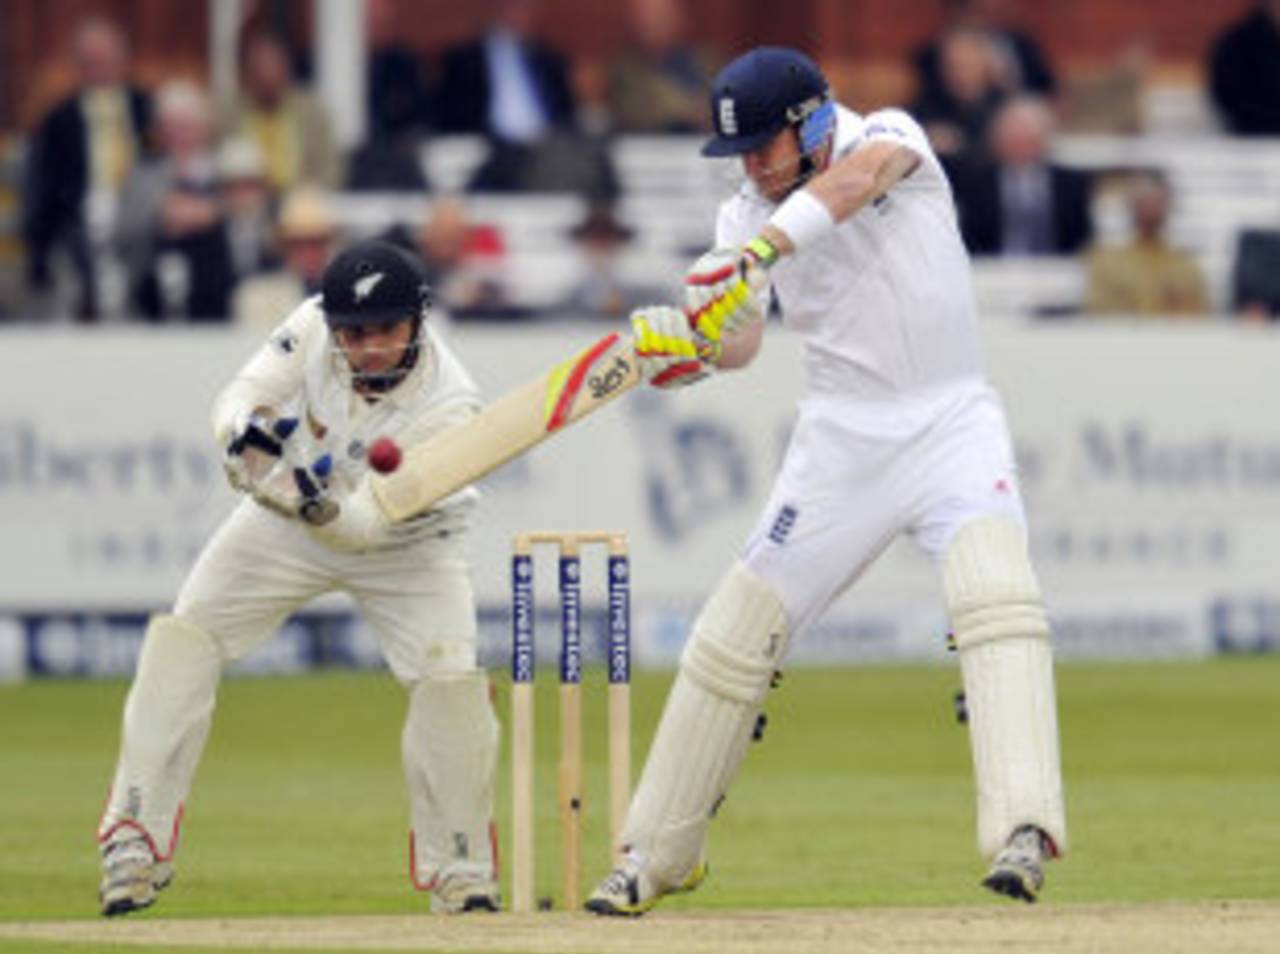 Ian Bell faced 133 balls for his 31, England v New Zealand, 1st Investec Test, Lord's, 1st day, May 16, 2013